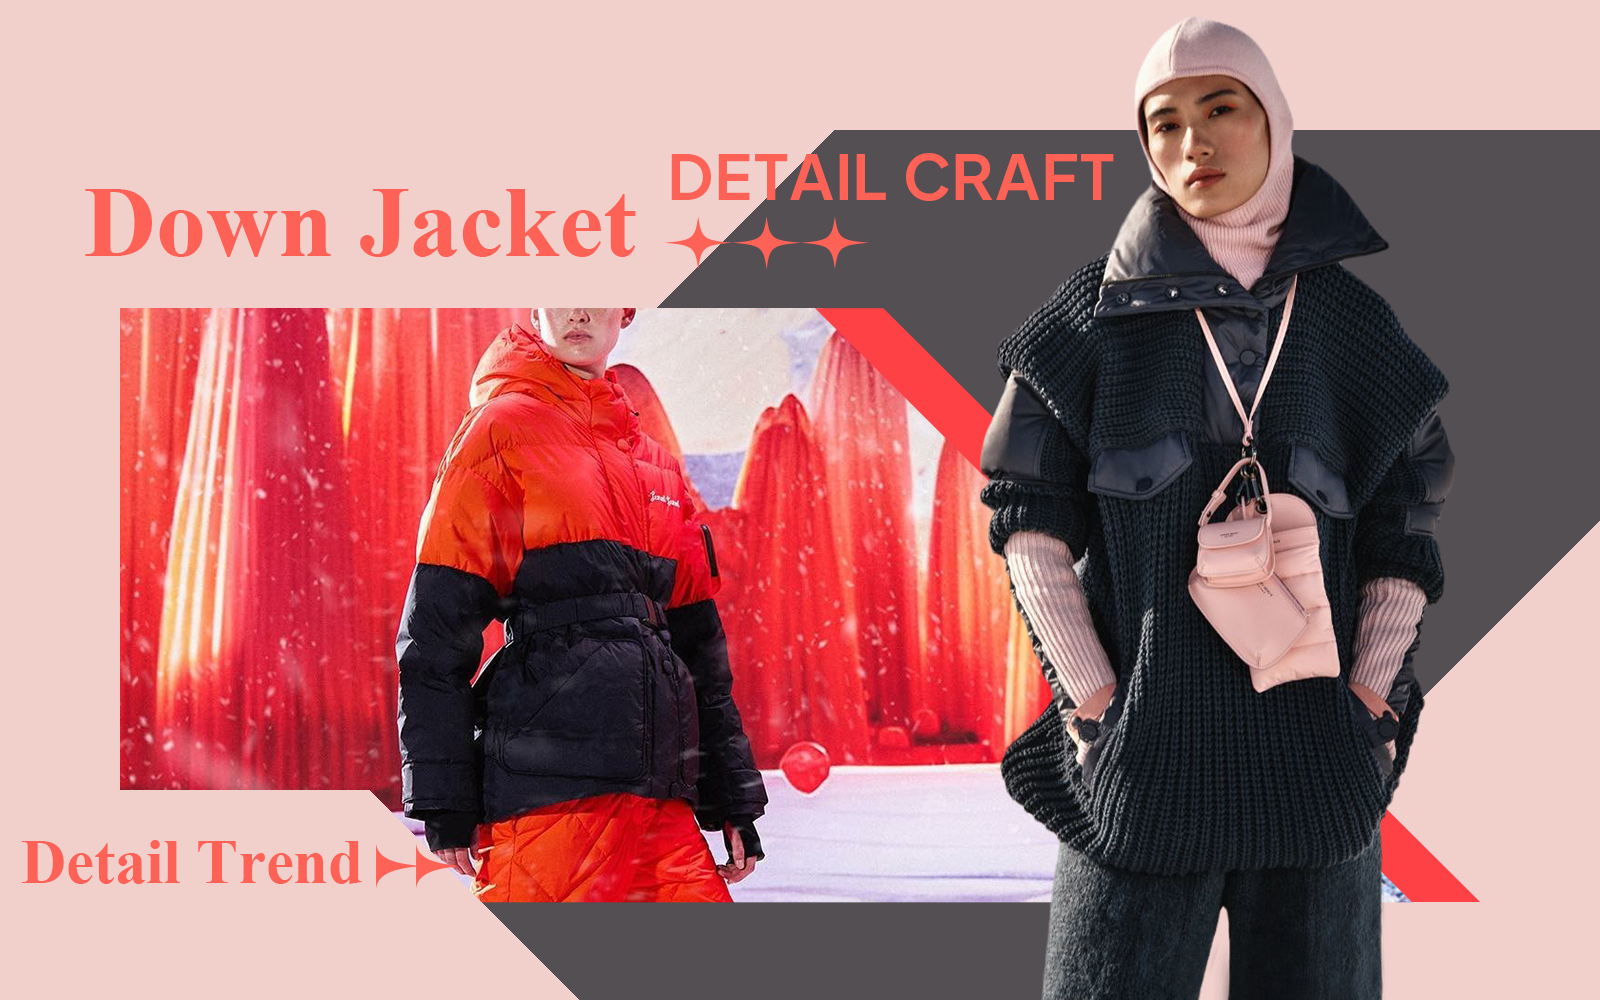 The Detail & Craft Trend for Down Jacket